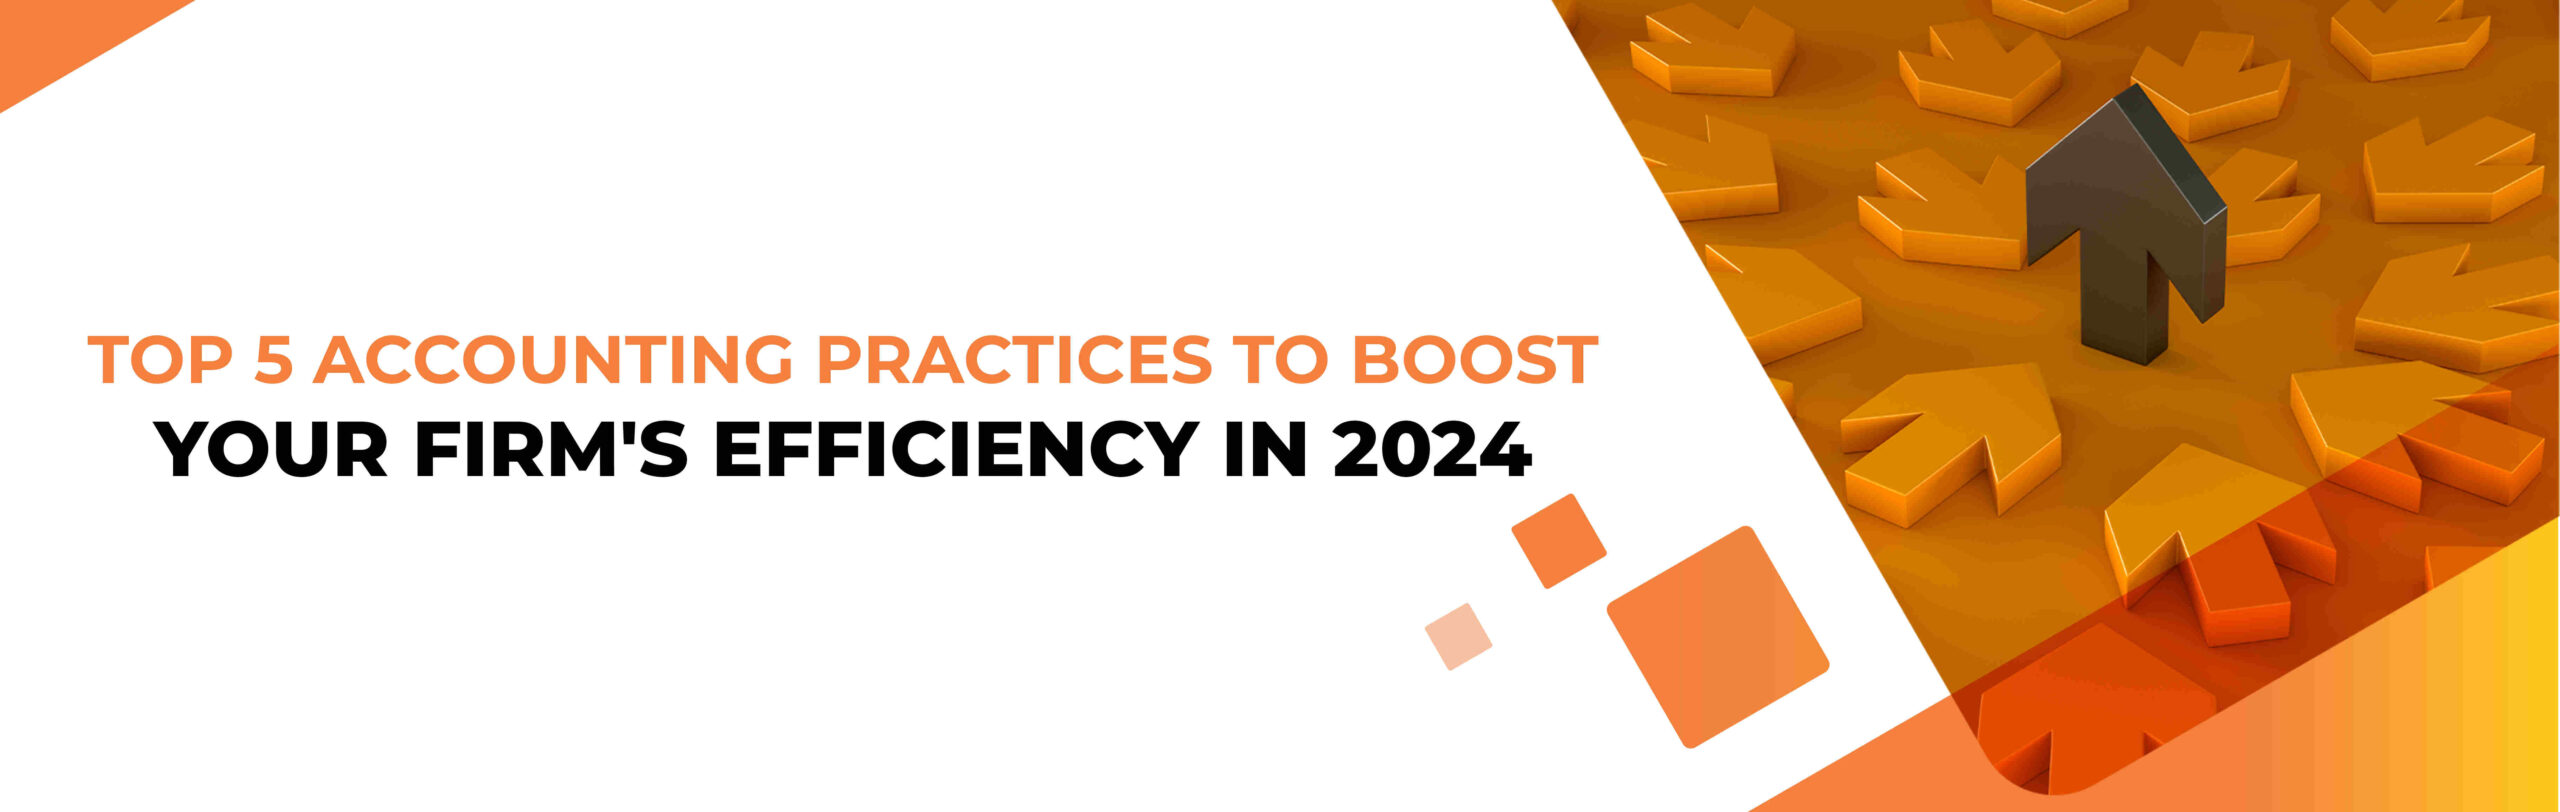 Top 5 Accounting Practices to Boost Your Firm's Efficiency in 2024